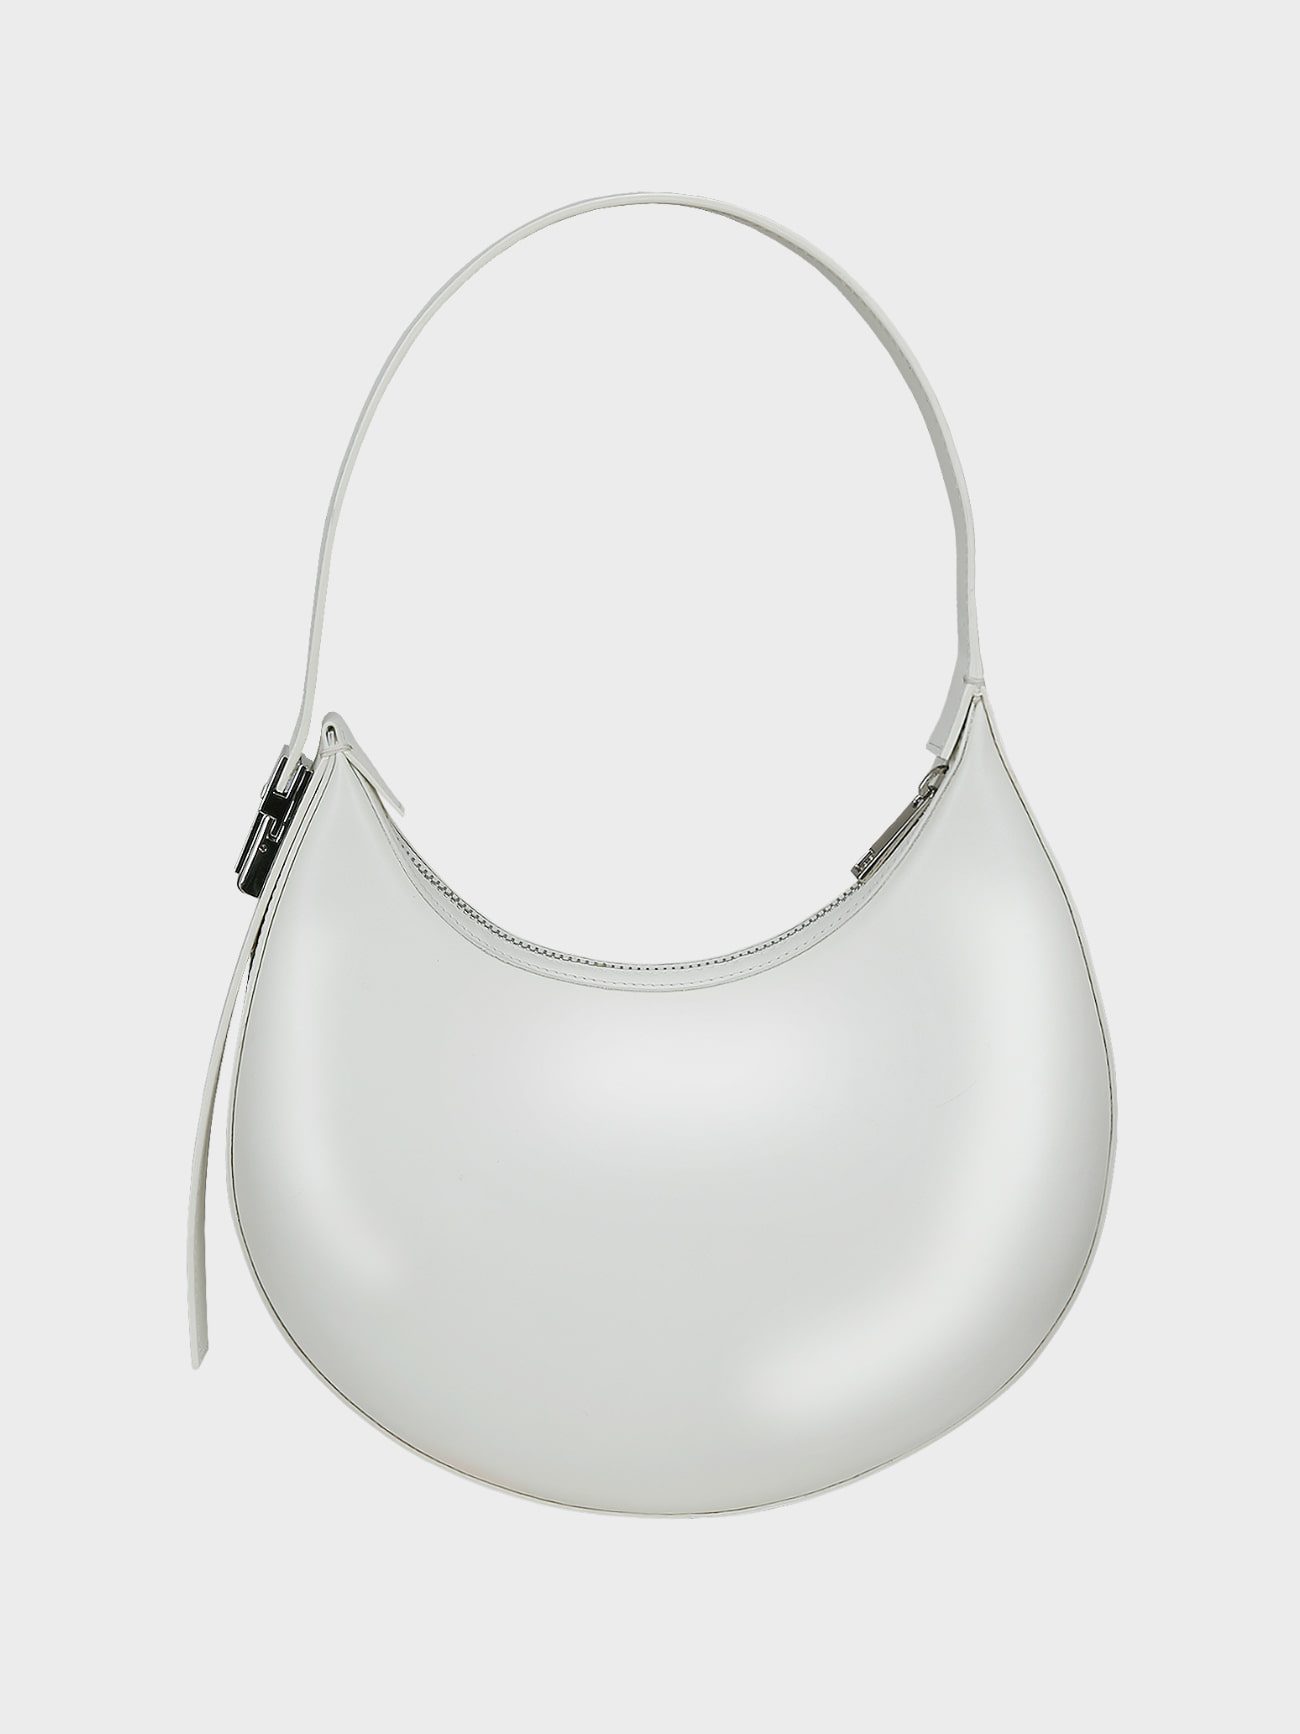 Myeyeko Exclusive Line - POTTERY BAG 포터리백 (WHITE) Limited Edition.